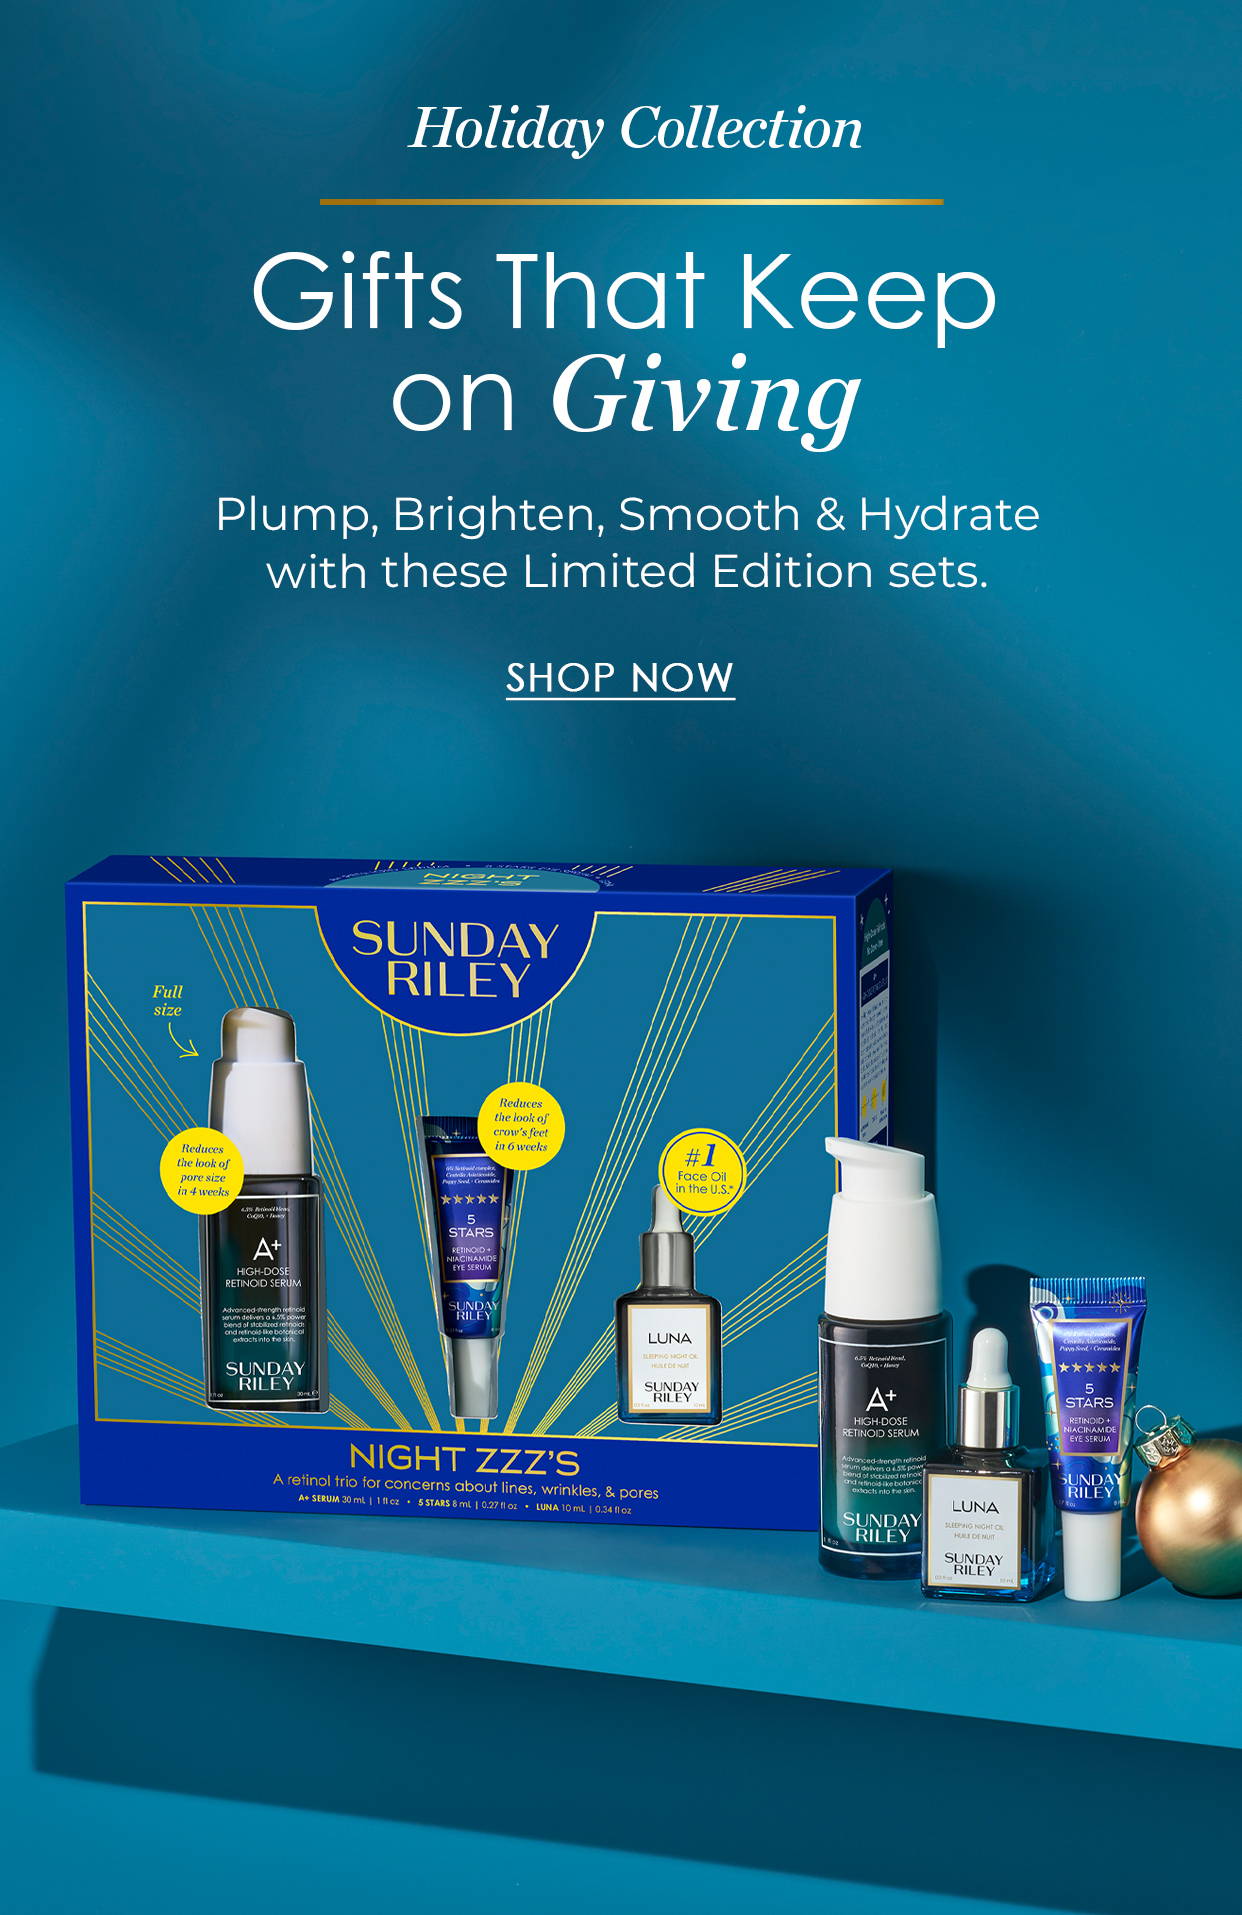 holiday collection - gifts that keep on giving - plump, brighten, smooth and hydrate with these limited edition sets